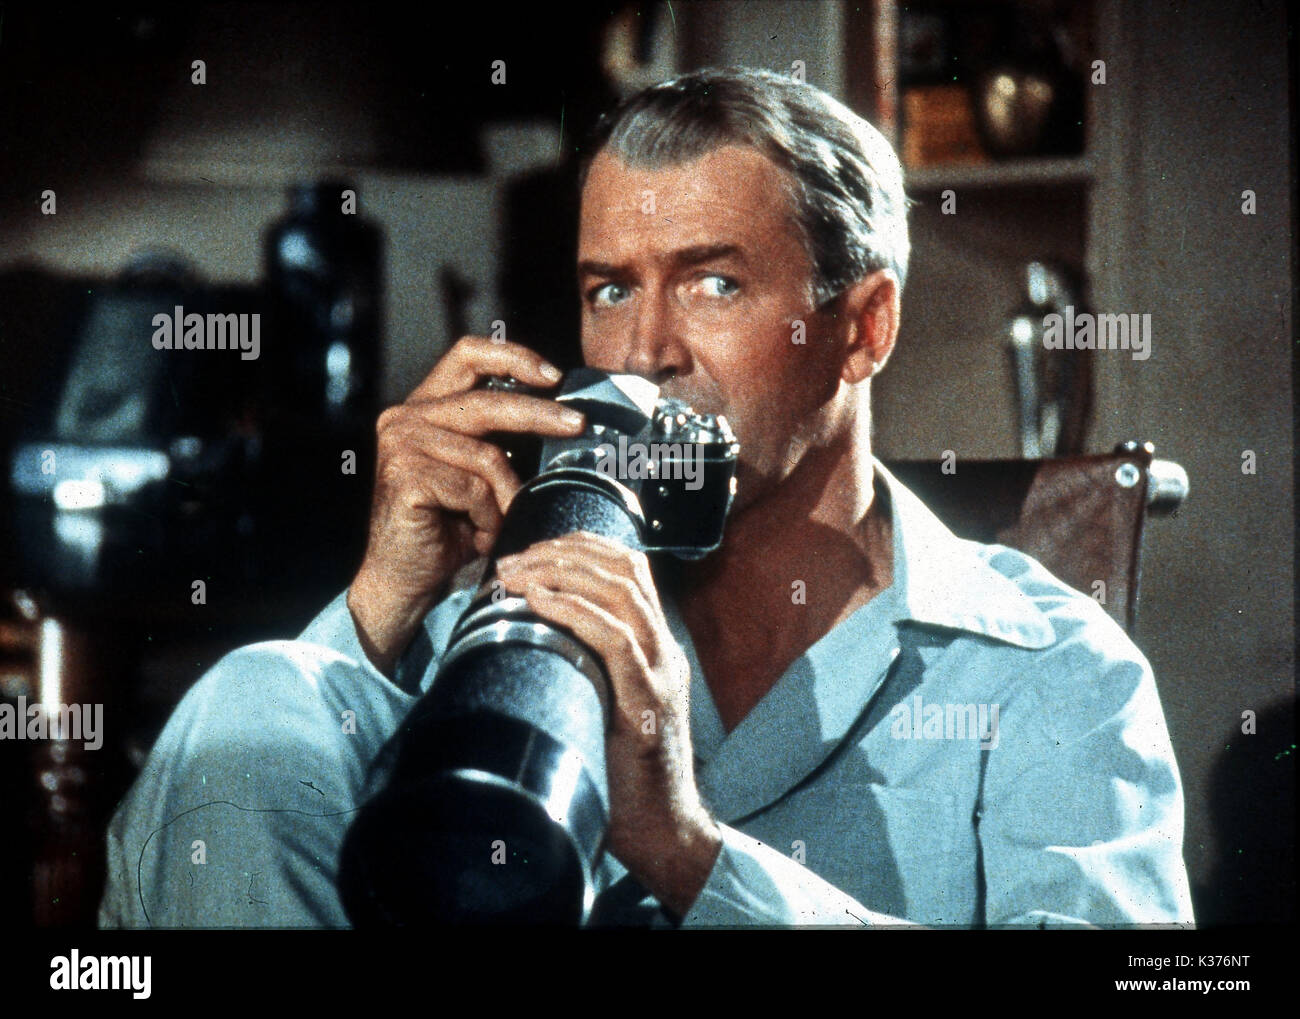 REAR WINDOW PARAMOUNT PICTURES JAMES STEWART     Date: 1954 Stock Photo